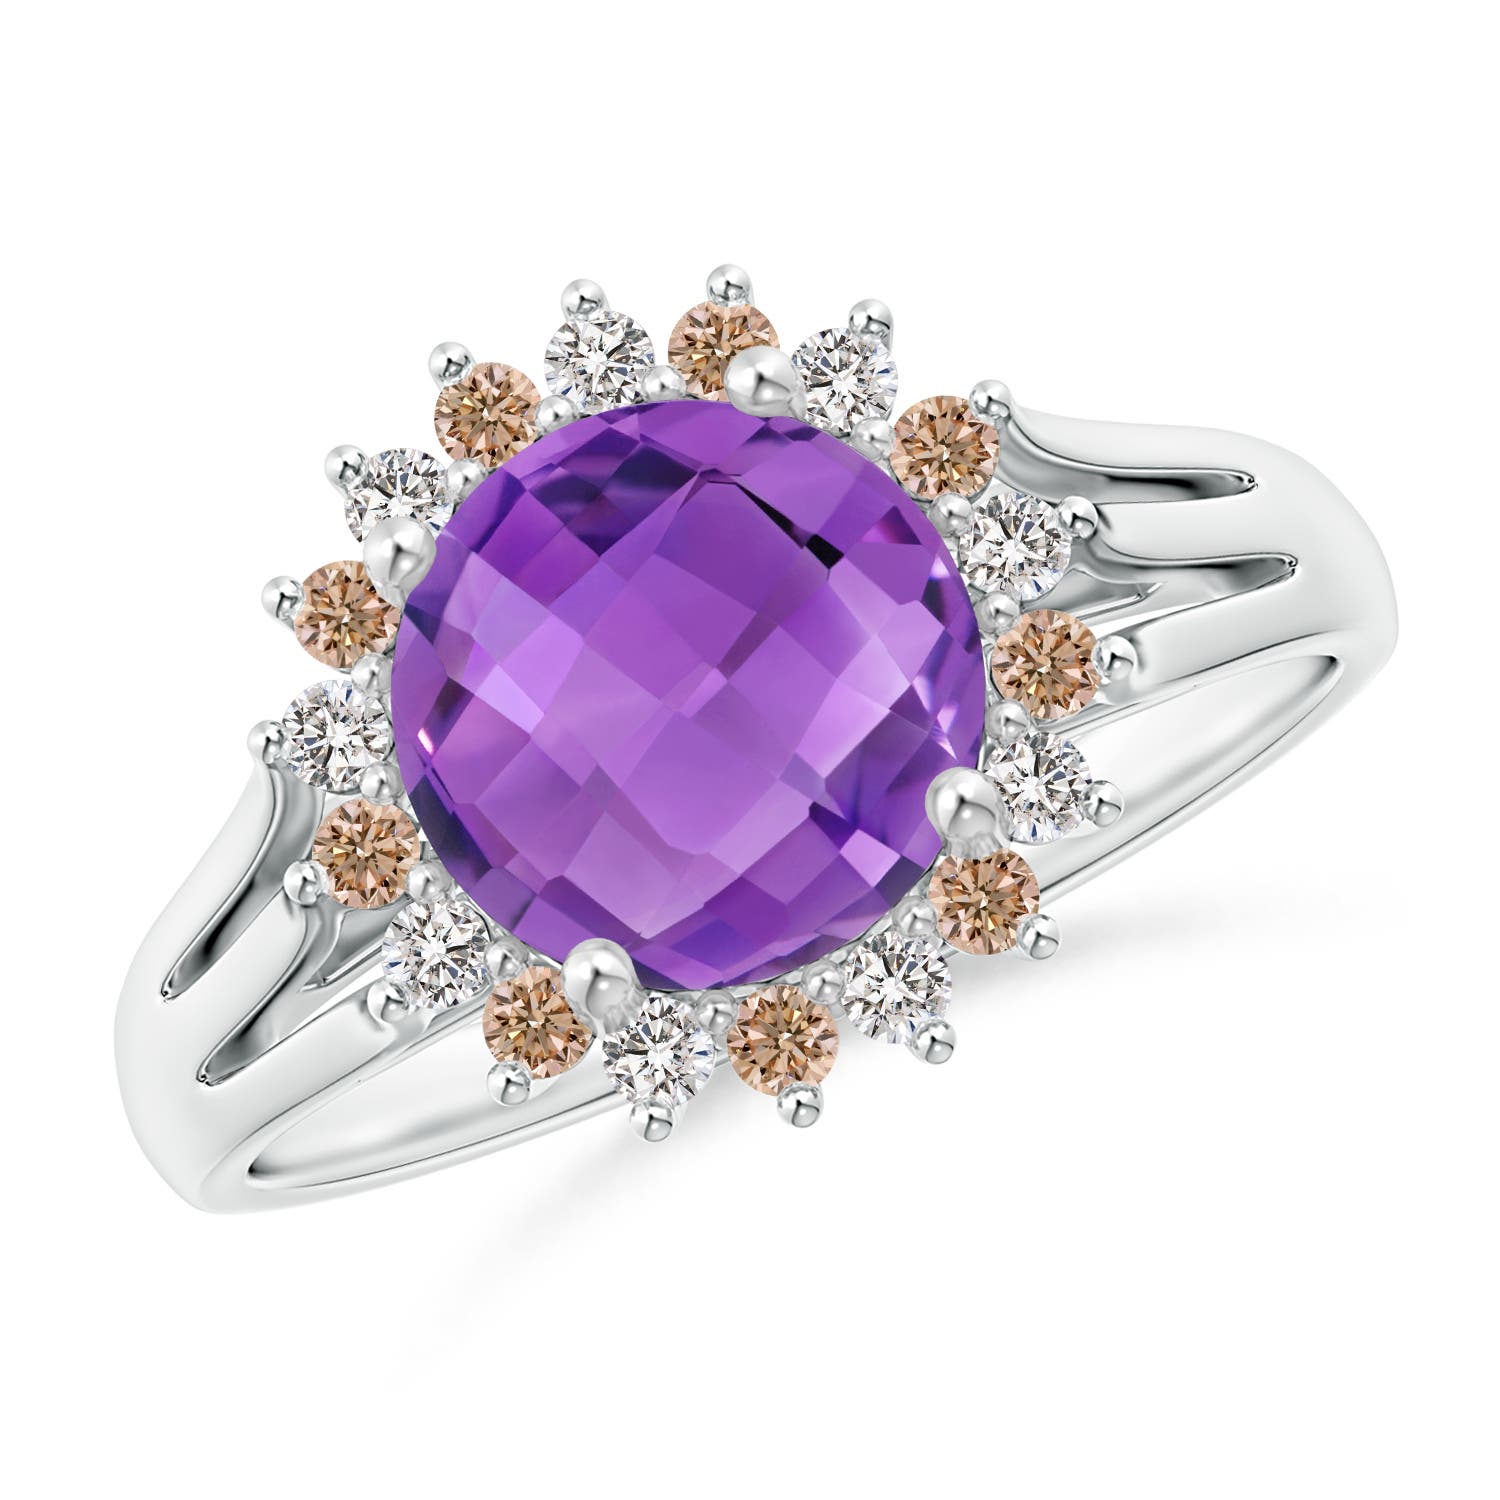 AA - Amethyst / 2.1 CT / 14 KT White Gold